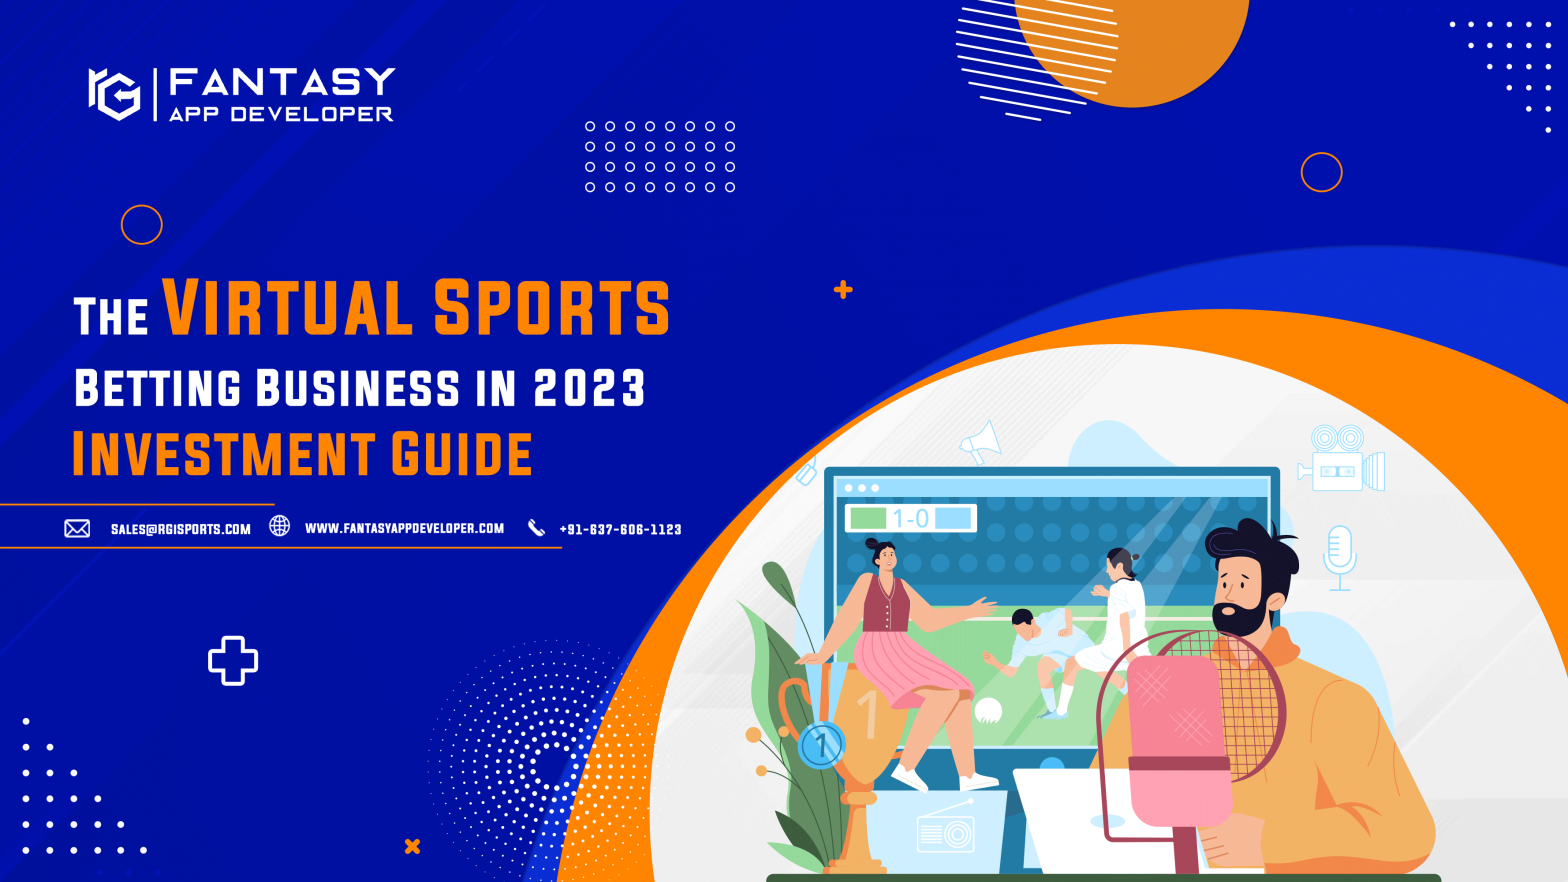 The Virtual Sports Betting Business in 2023 Investment Guide